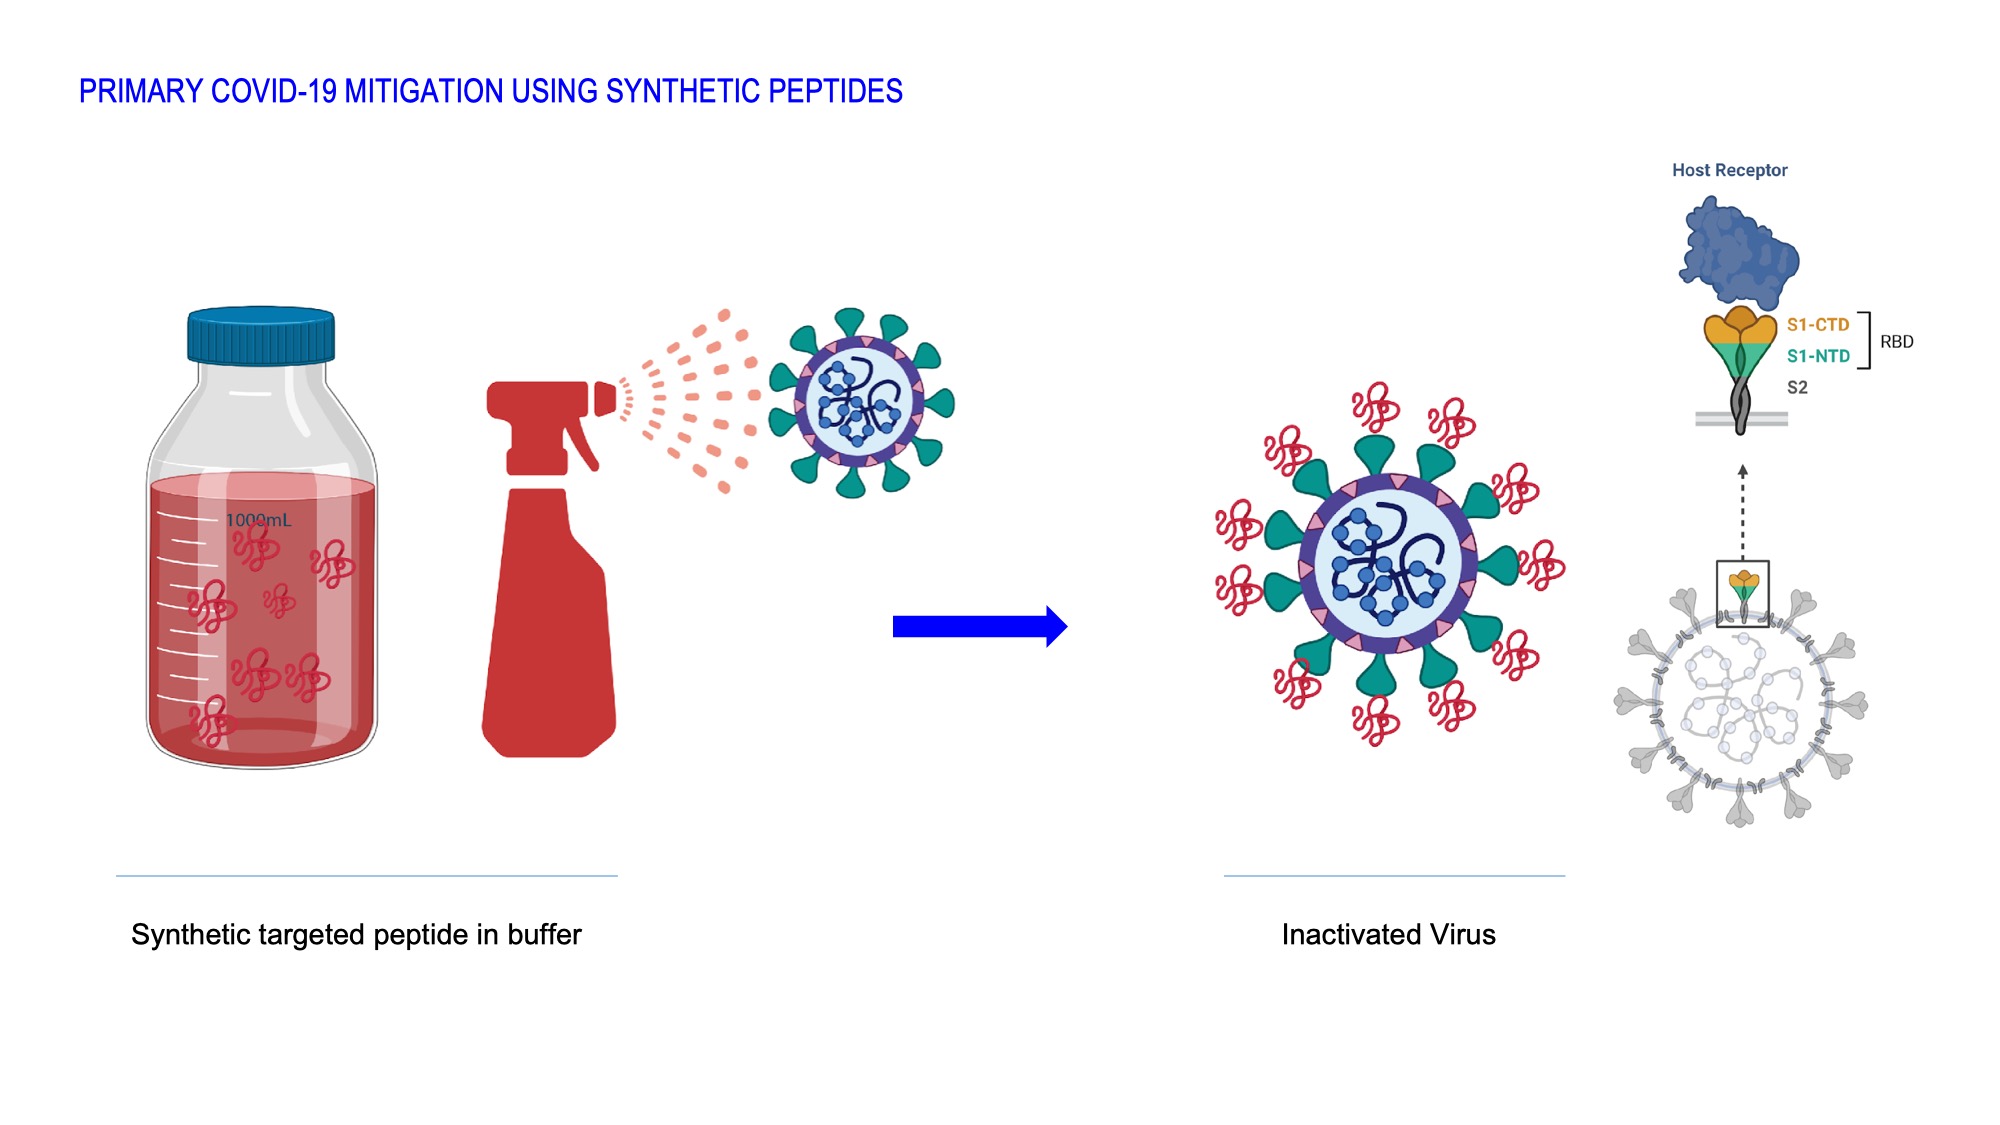 PRIMARY COVID-19 MITIGATION USING SYNTHETIC PEPTIDES. Synthetic targeted peptide in buffer. Inactivated virus.